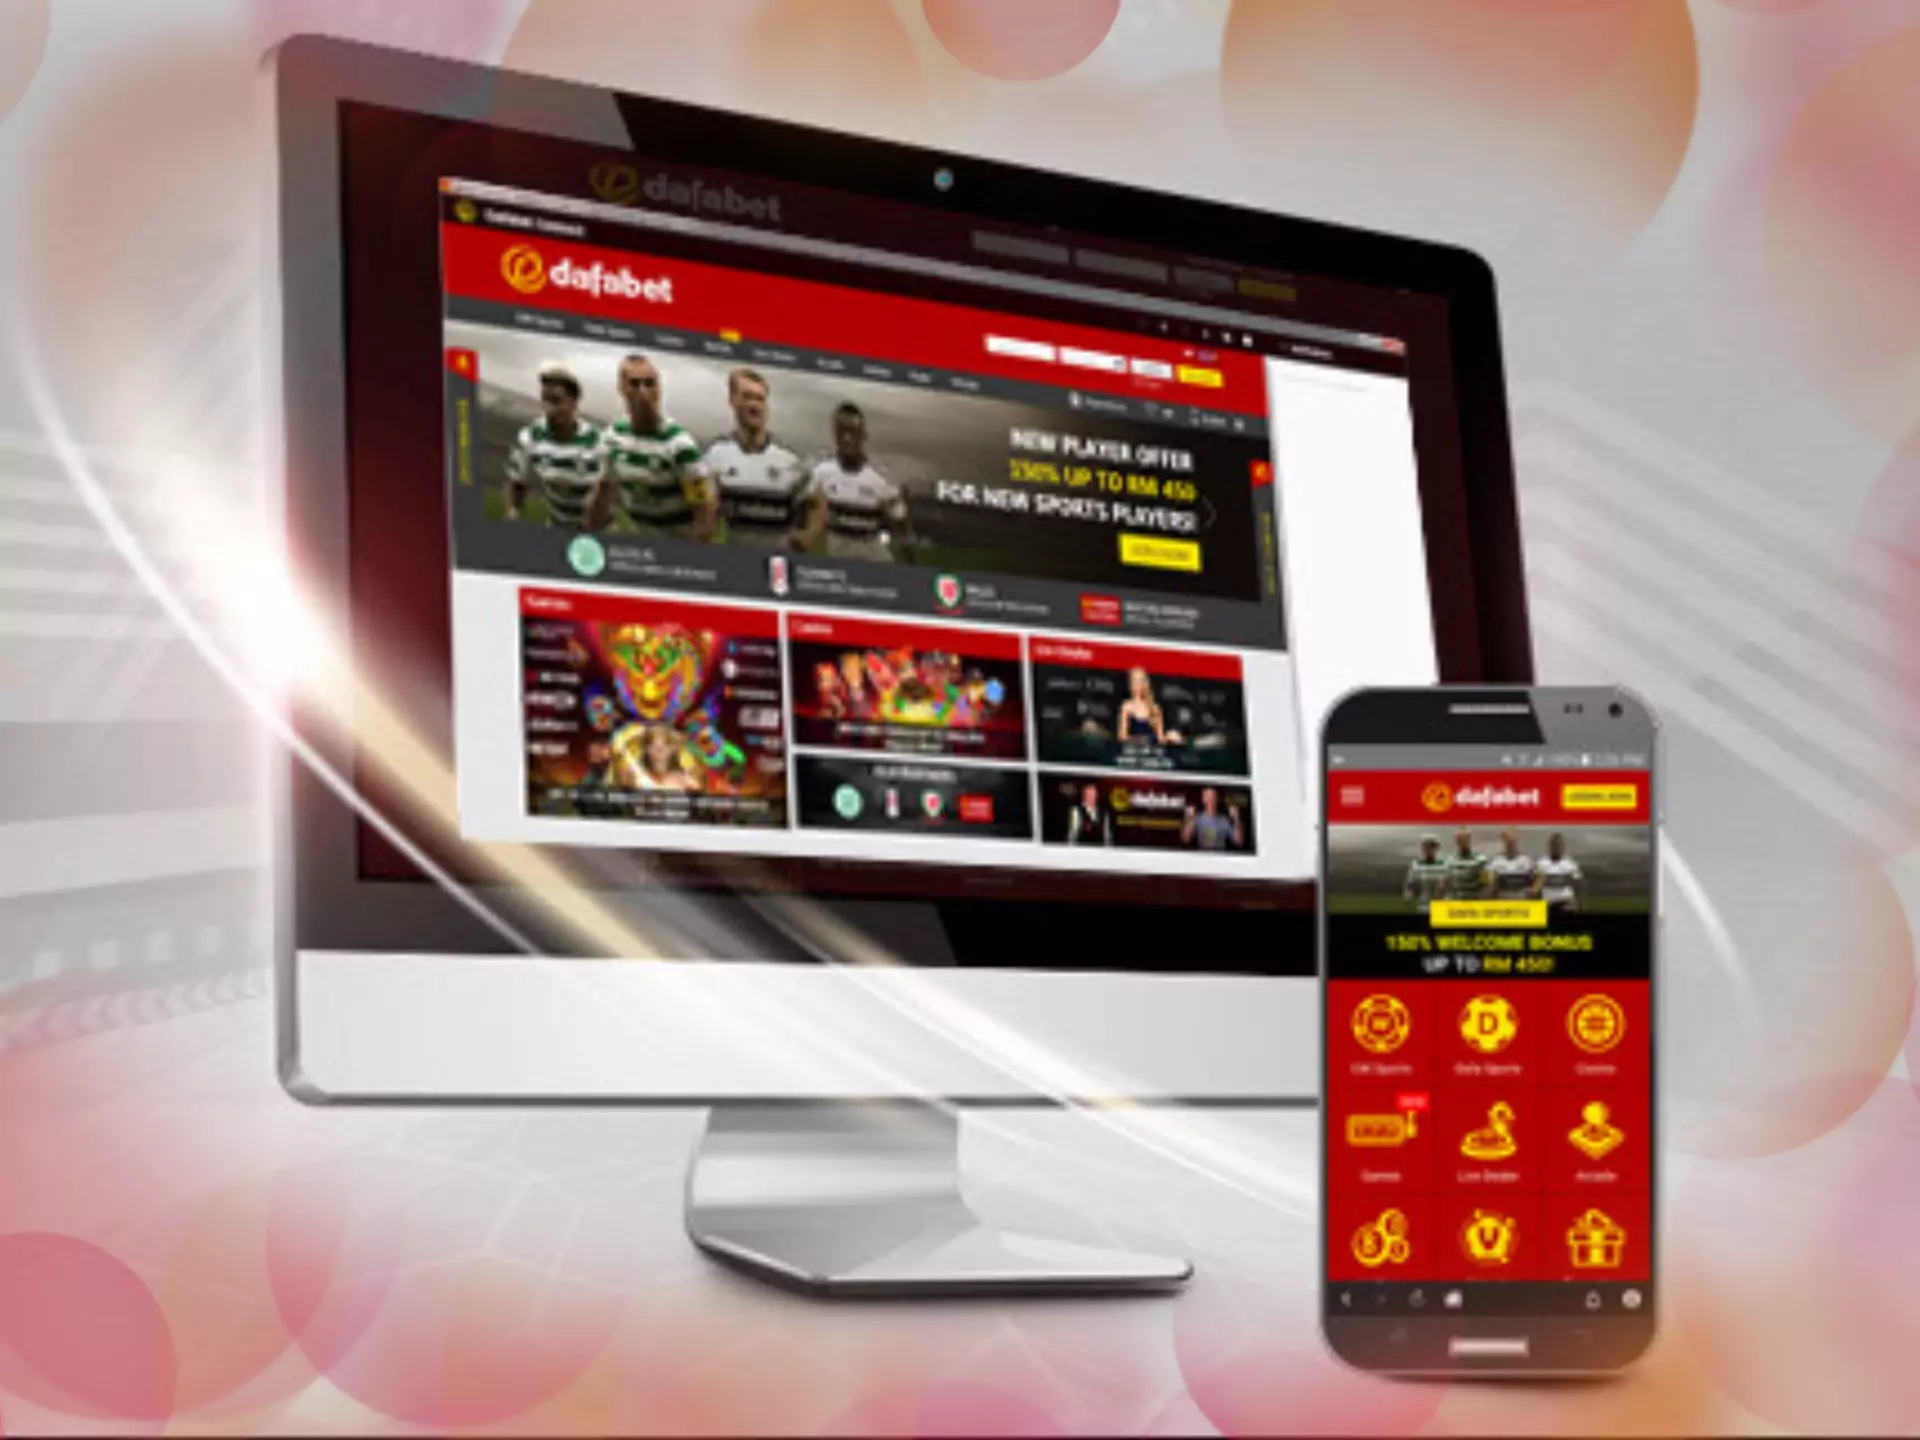 Dafabet mobile app has a full functionality as a browser version does.